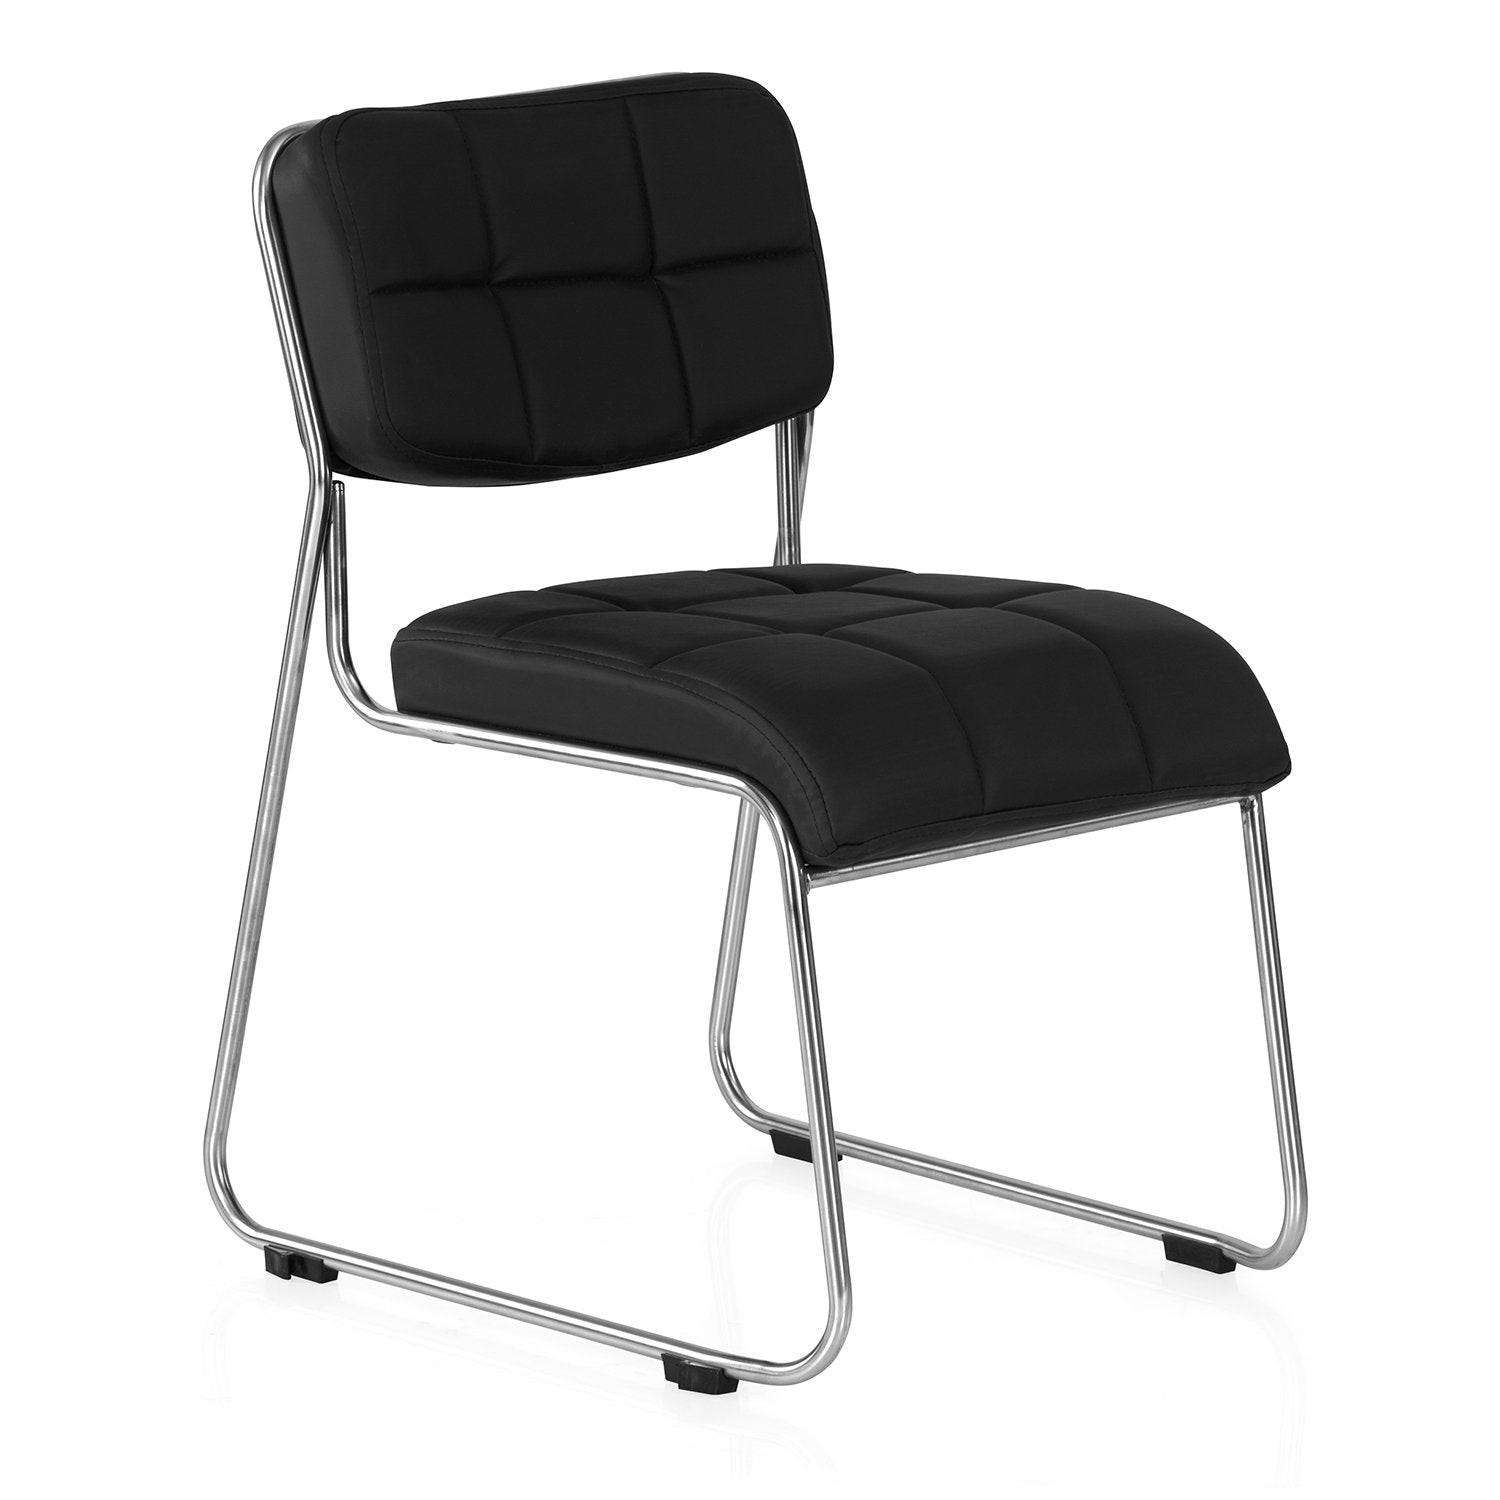 contract 02 soft pvc visitor chair without arm black